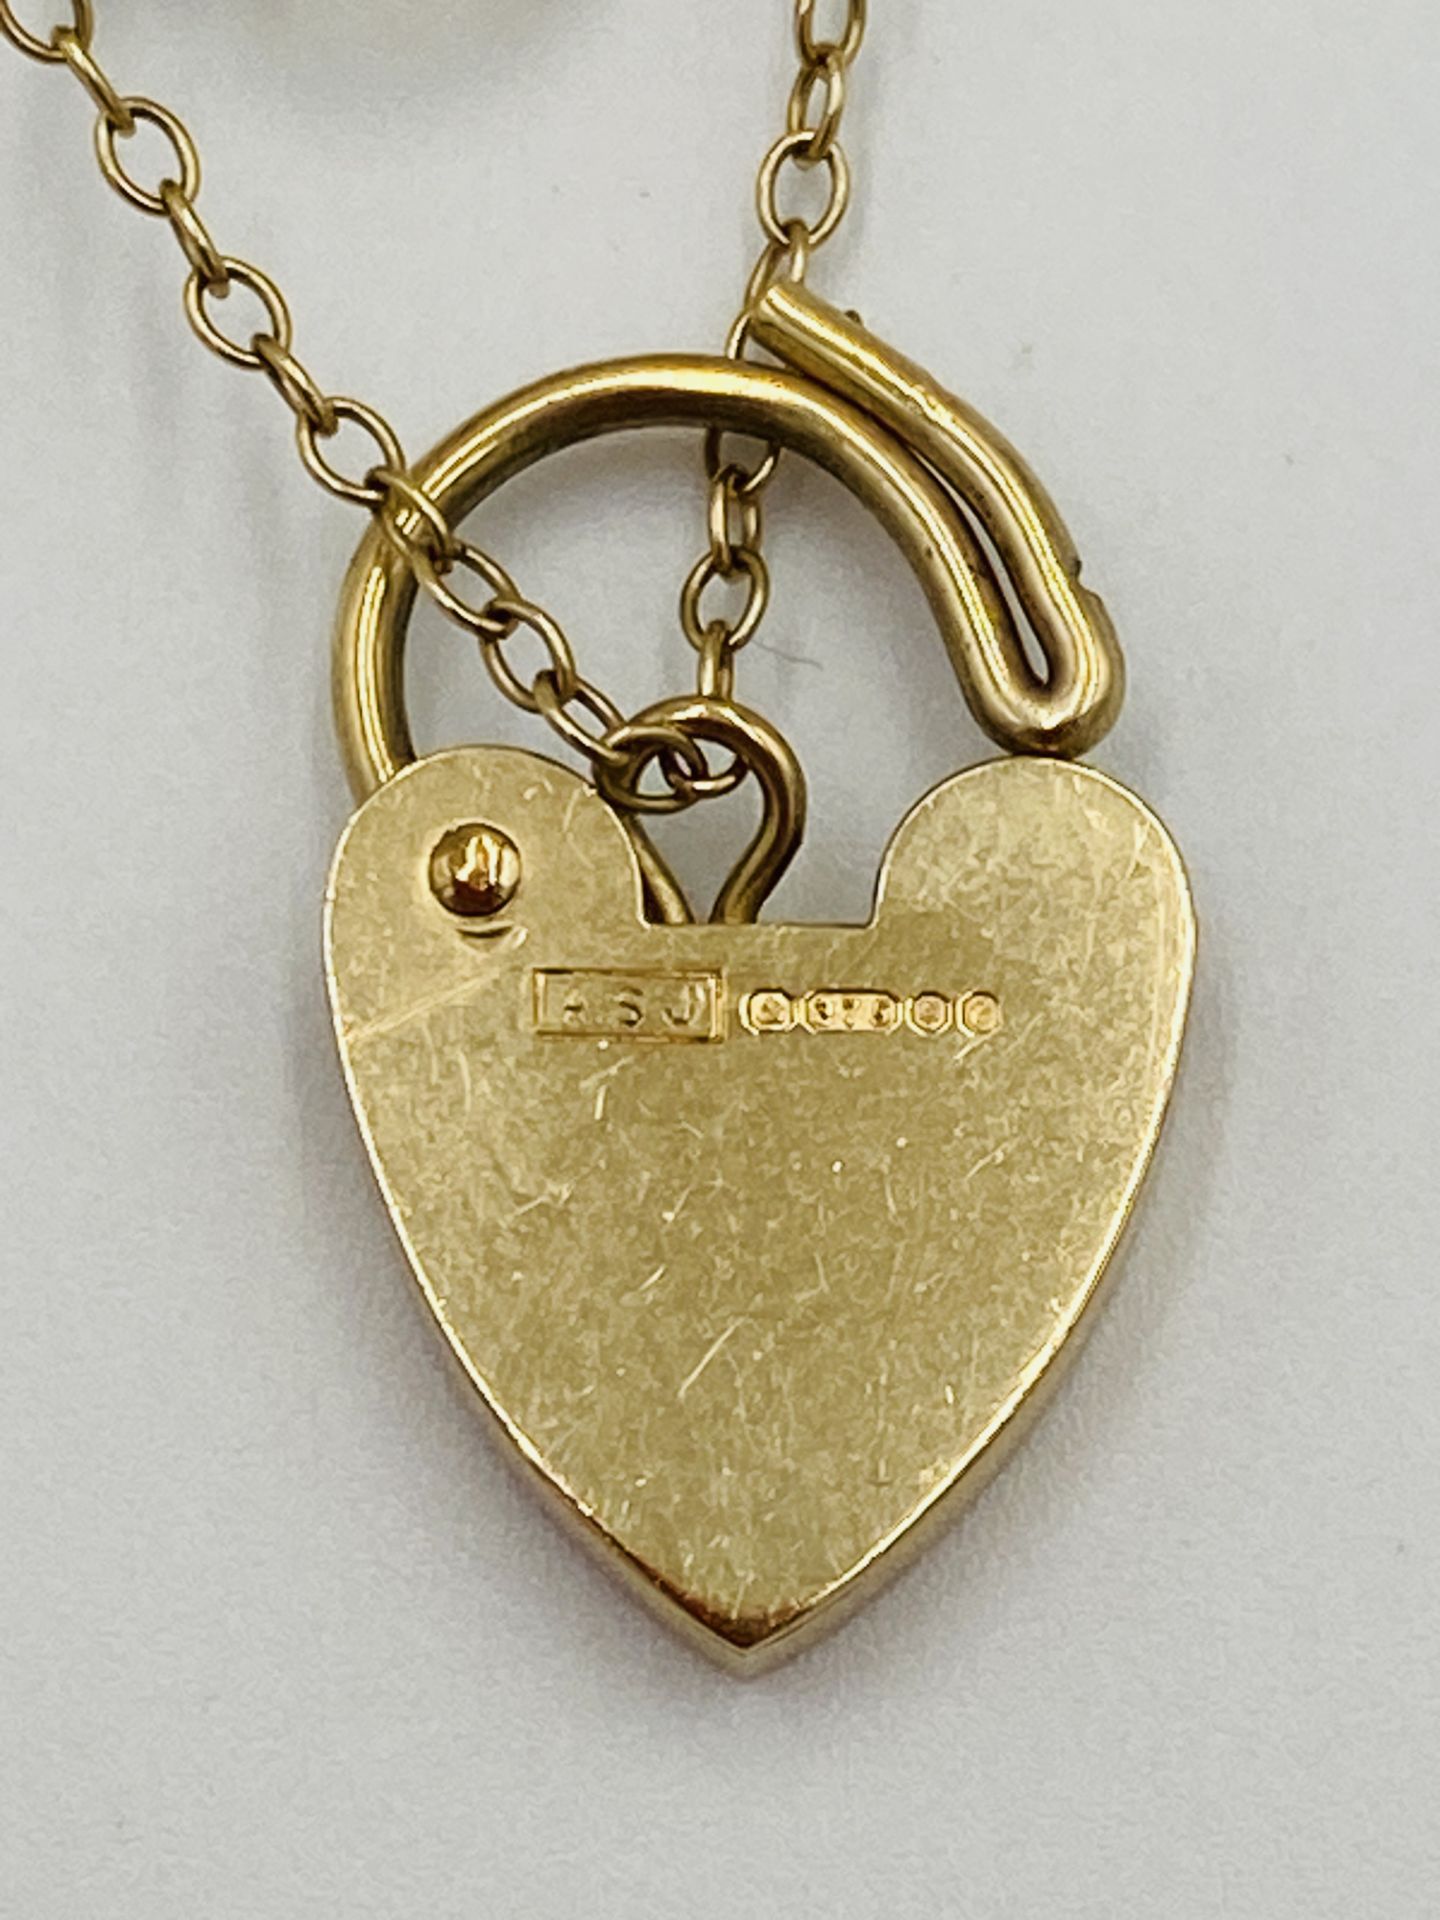 9ct gold bracelet with 9ct gold padlock - Image 4 of 6